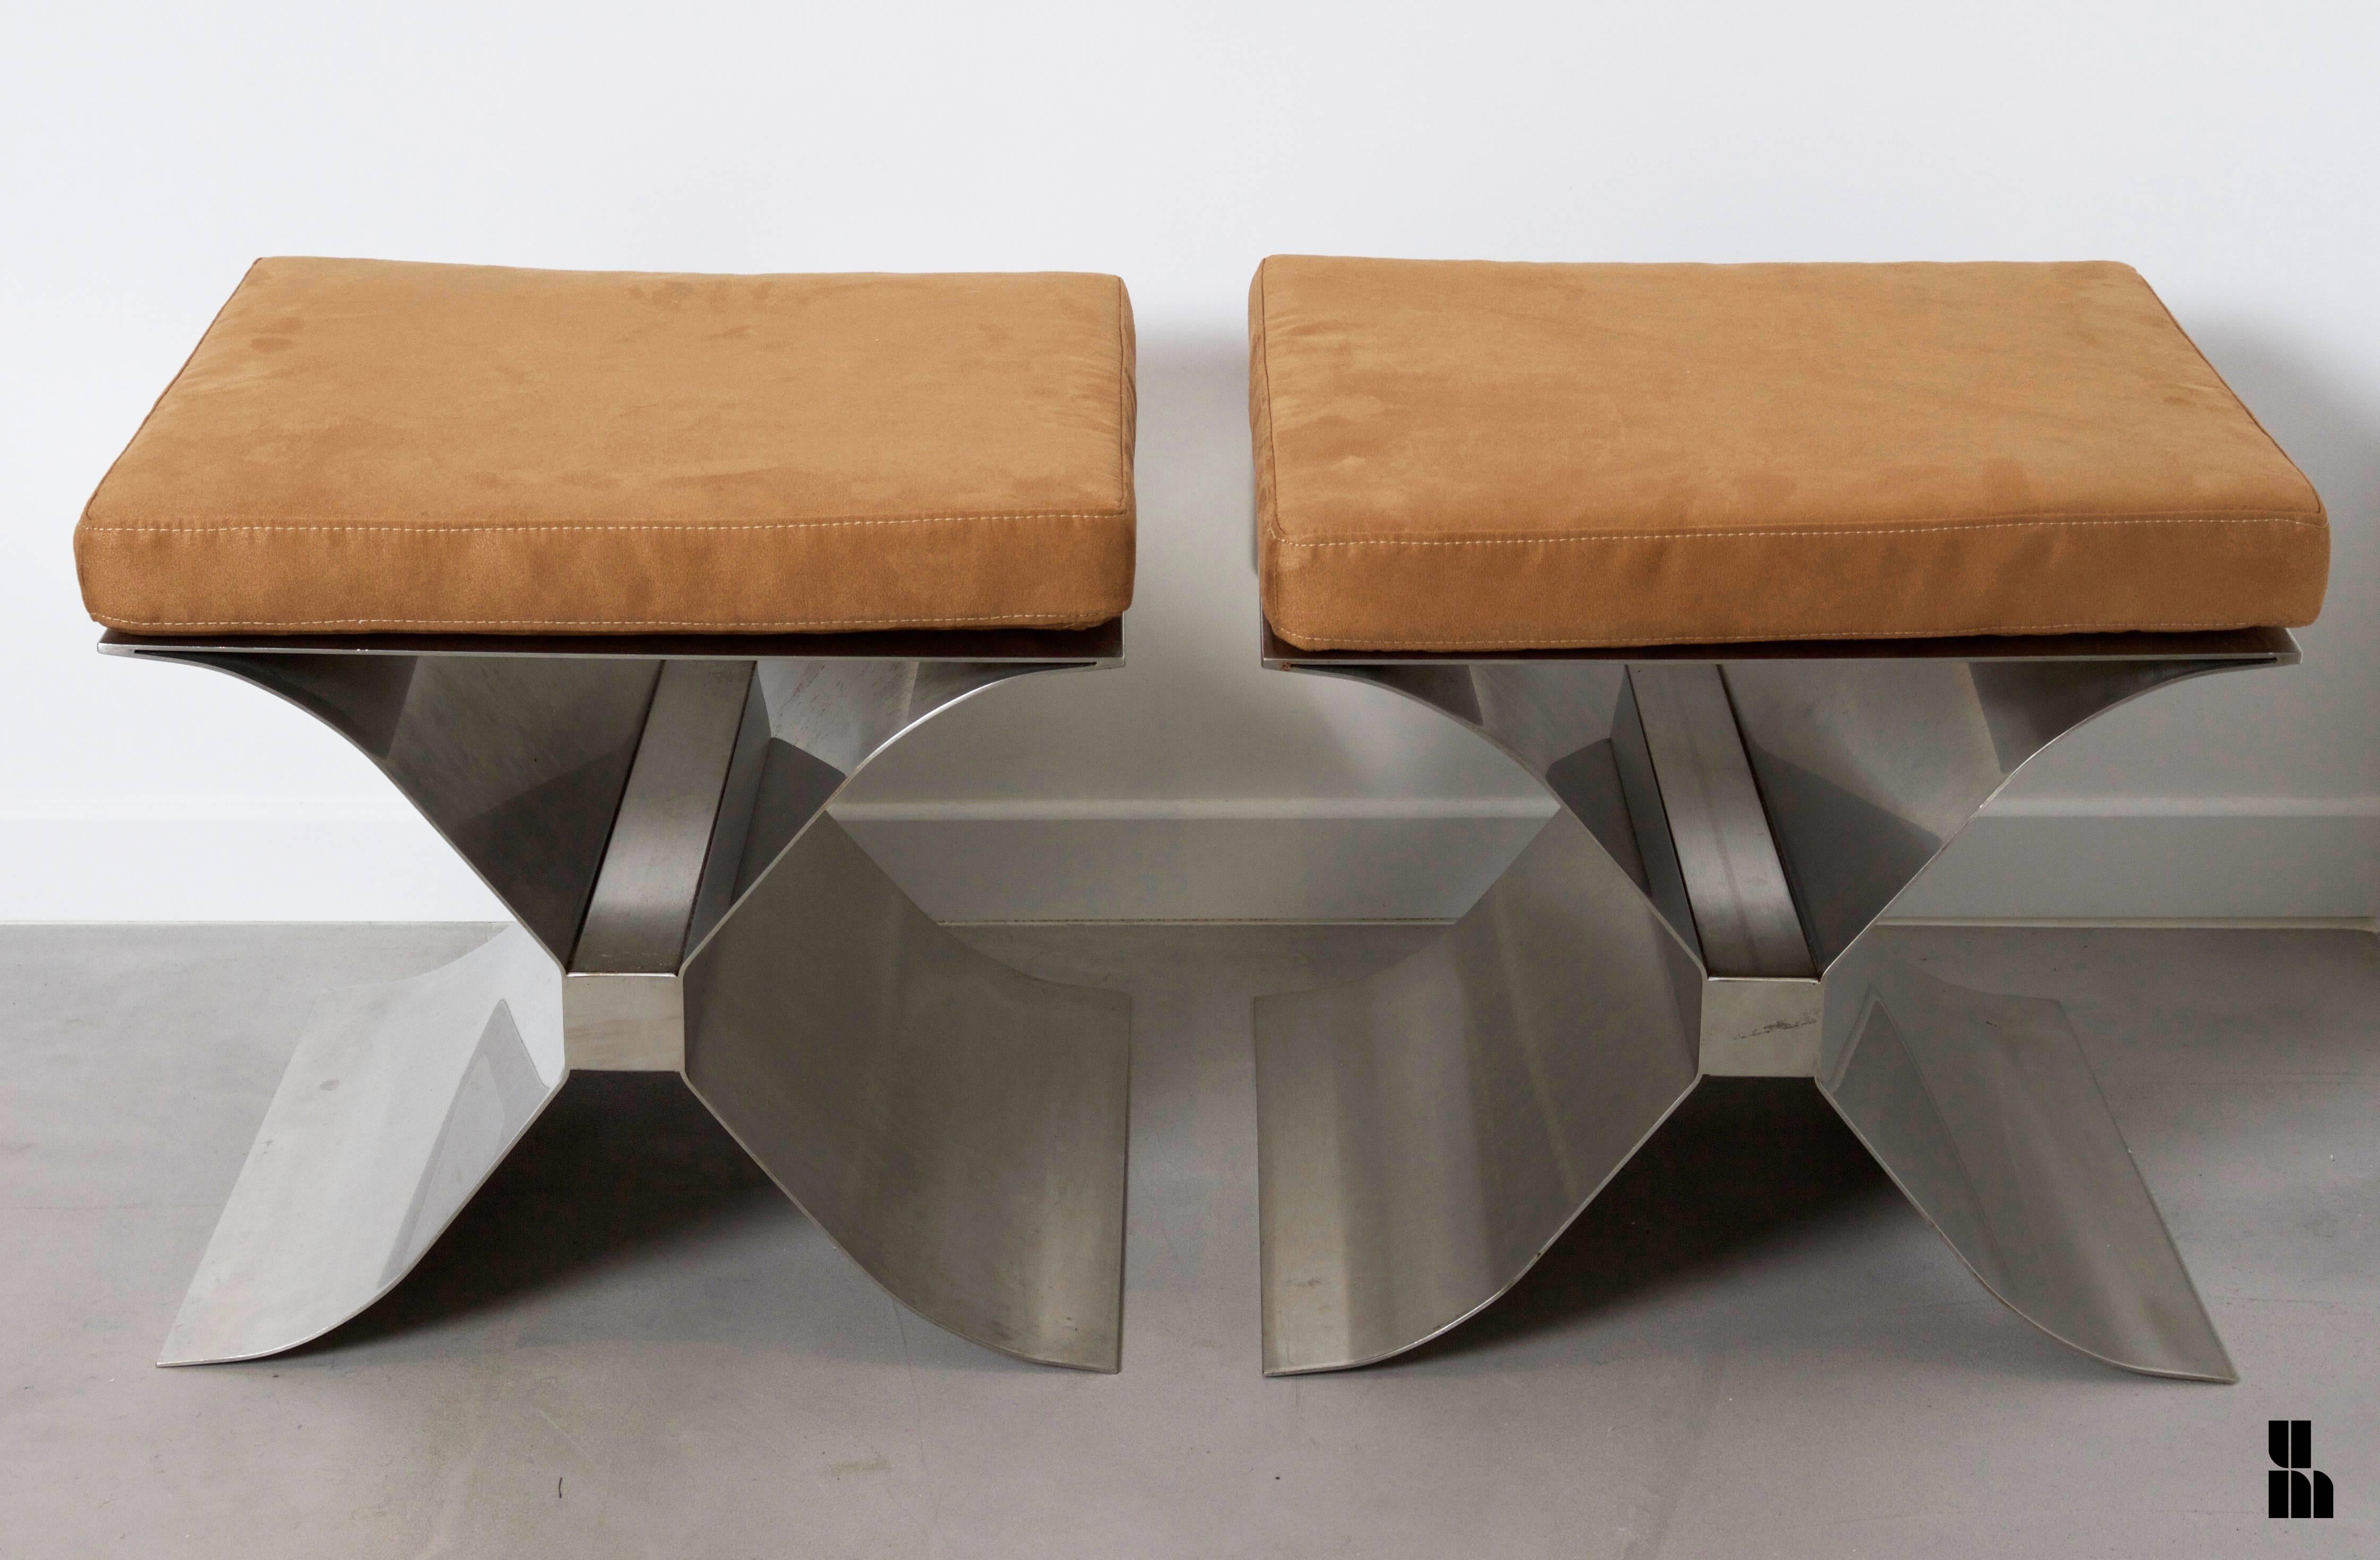 Exceptional pair of stainless steel X-leg stools designed by François Monnet and edited by Kappa in the 1970s.
It comes with light brown suede seats.
Strong drawing by the French designer F. Monnet.
Very good original condition.